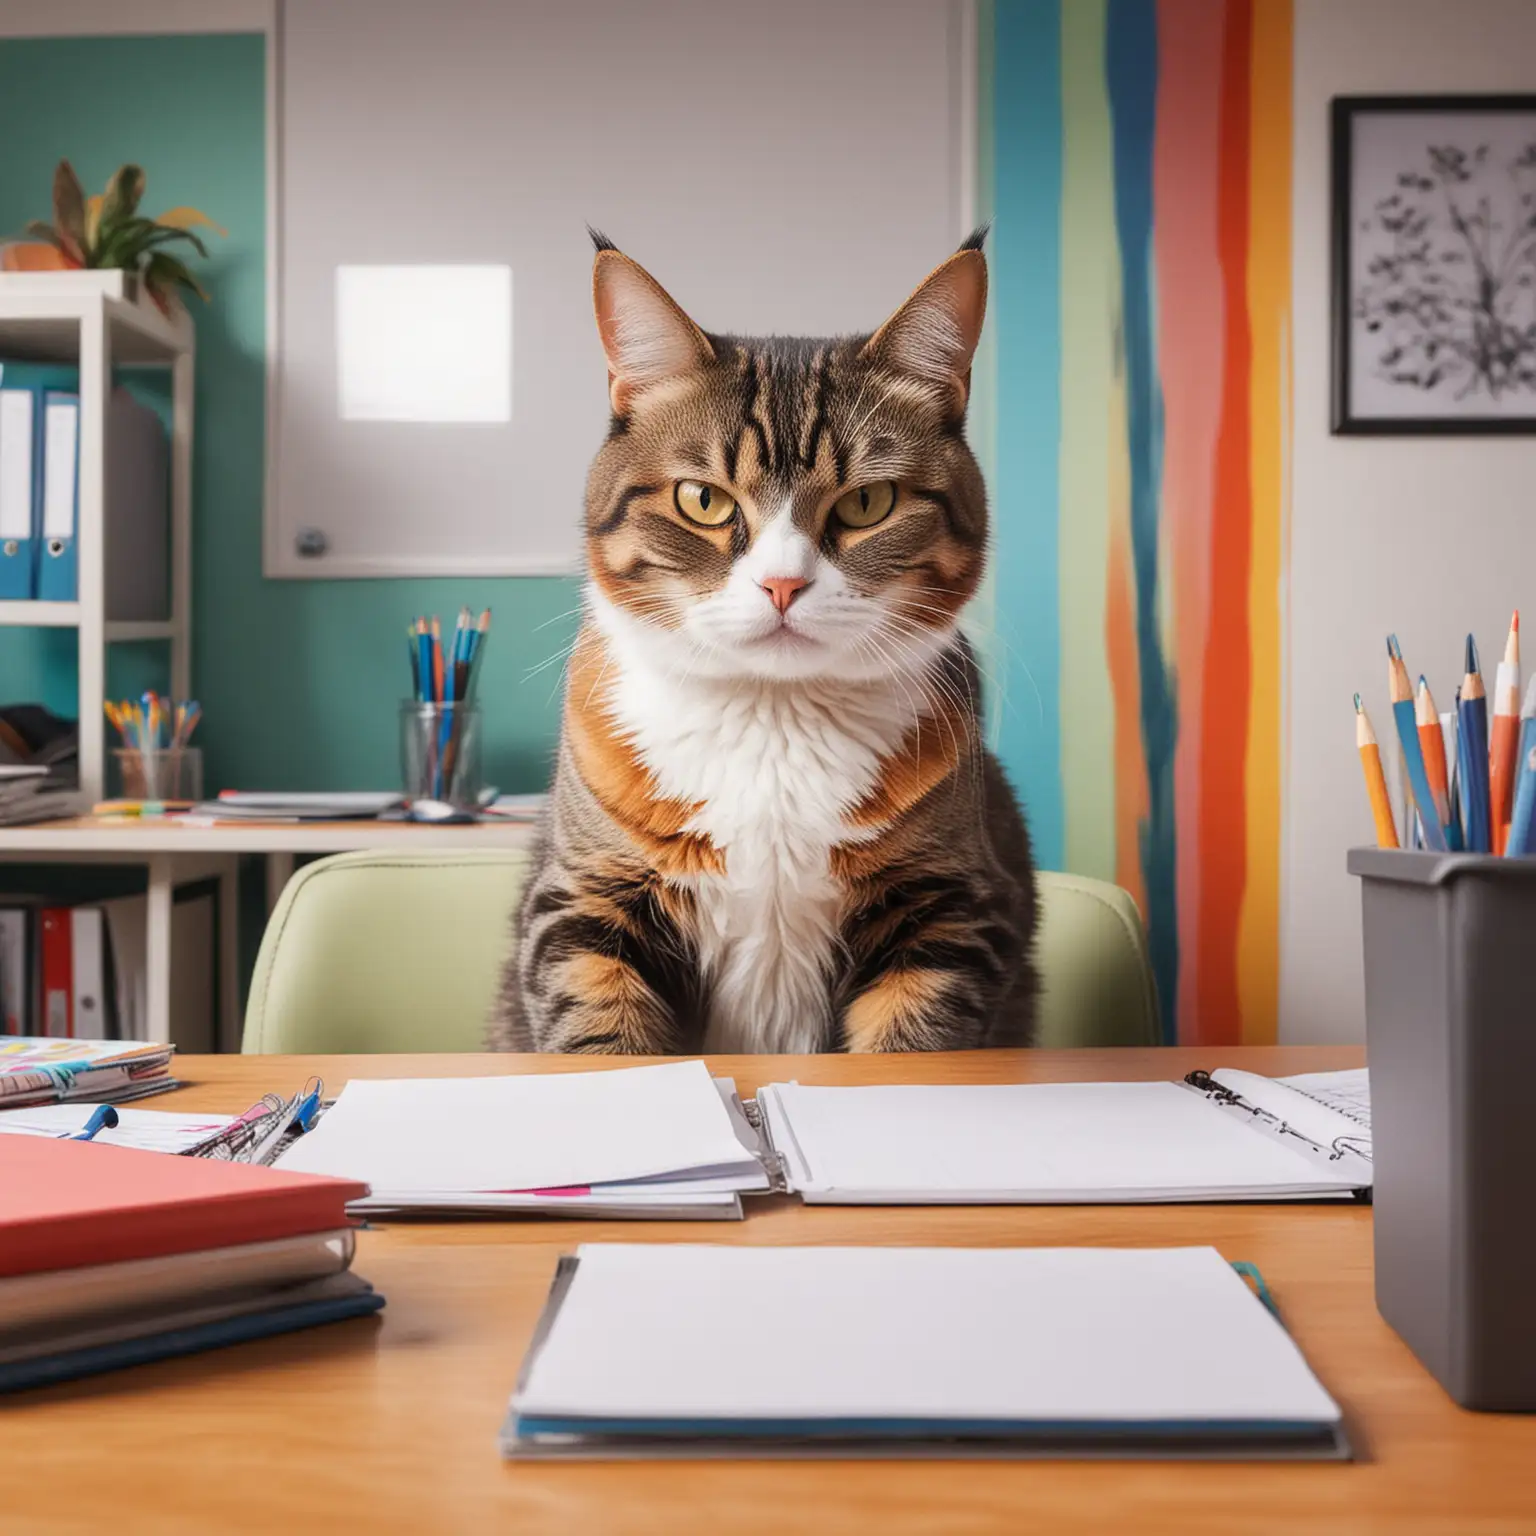 Create a picture of an angry-looking cat sitting in a colorful office.